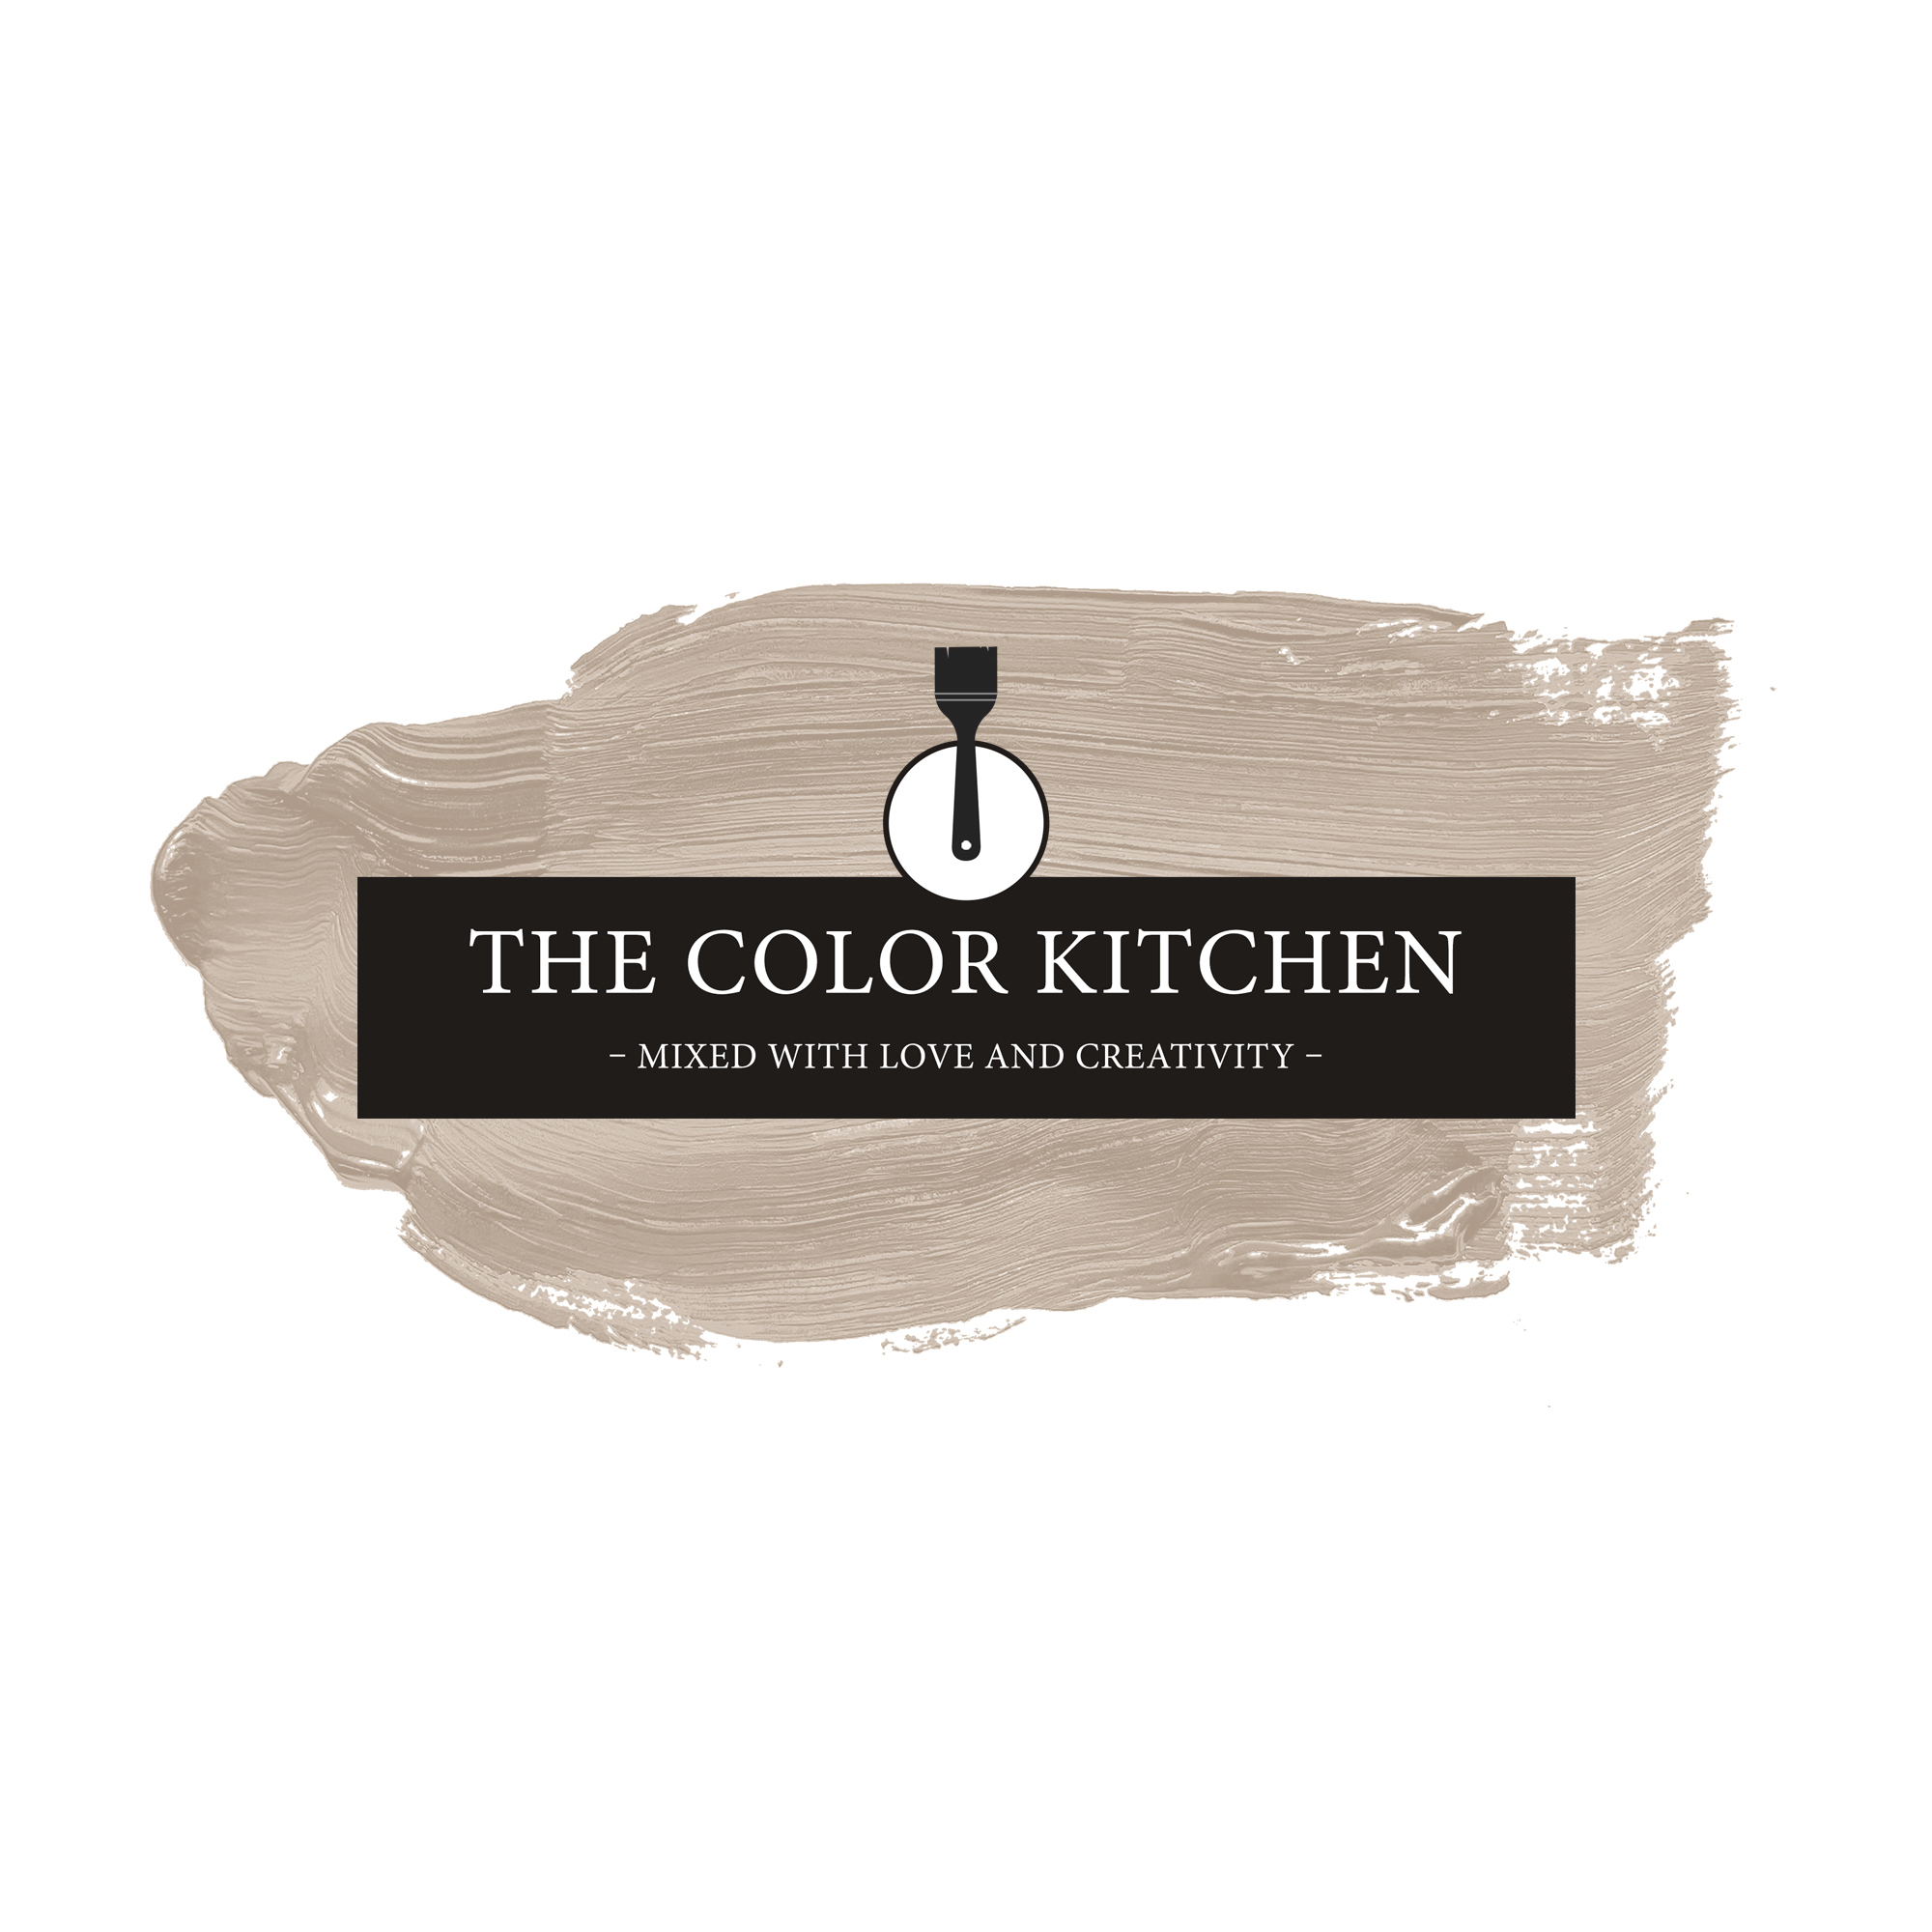 The Color Kitchen Seedy Sunflower 5 l